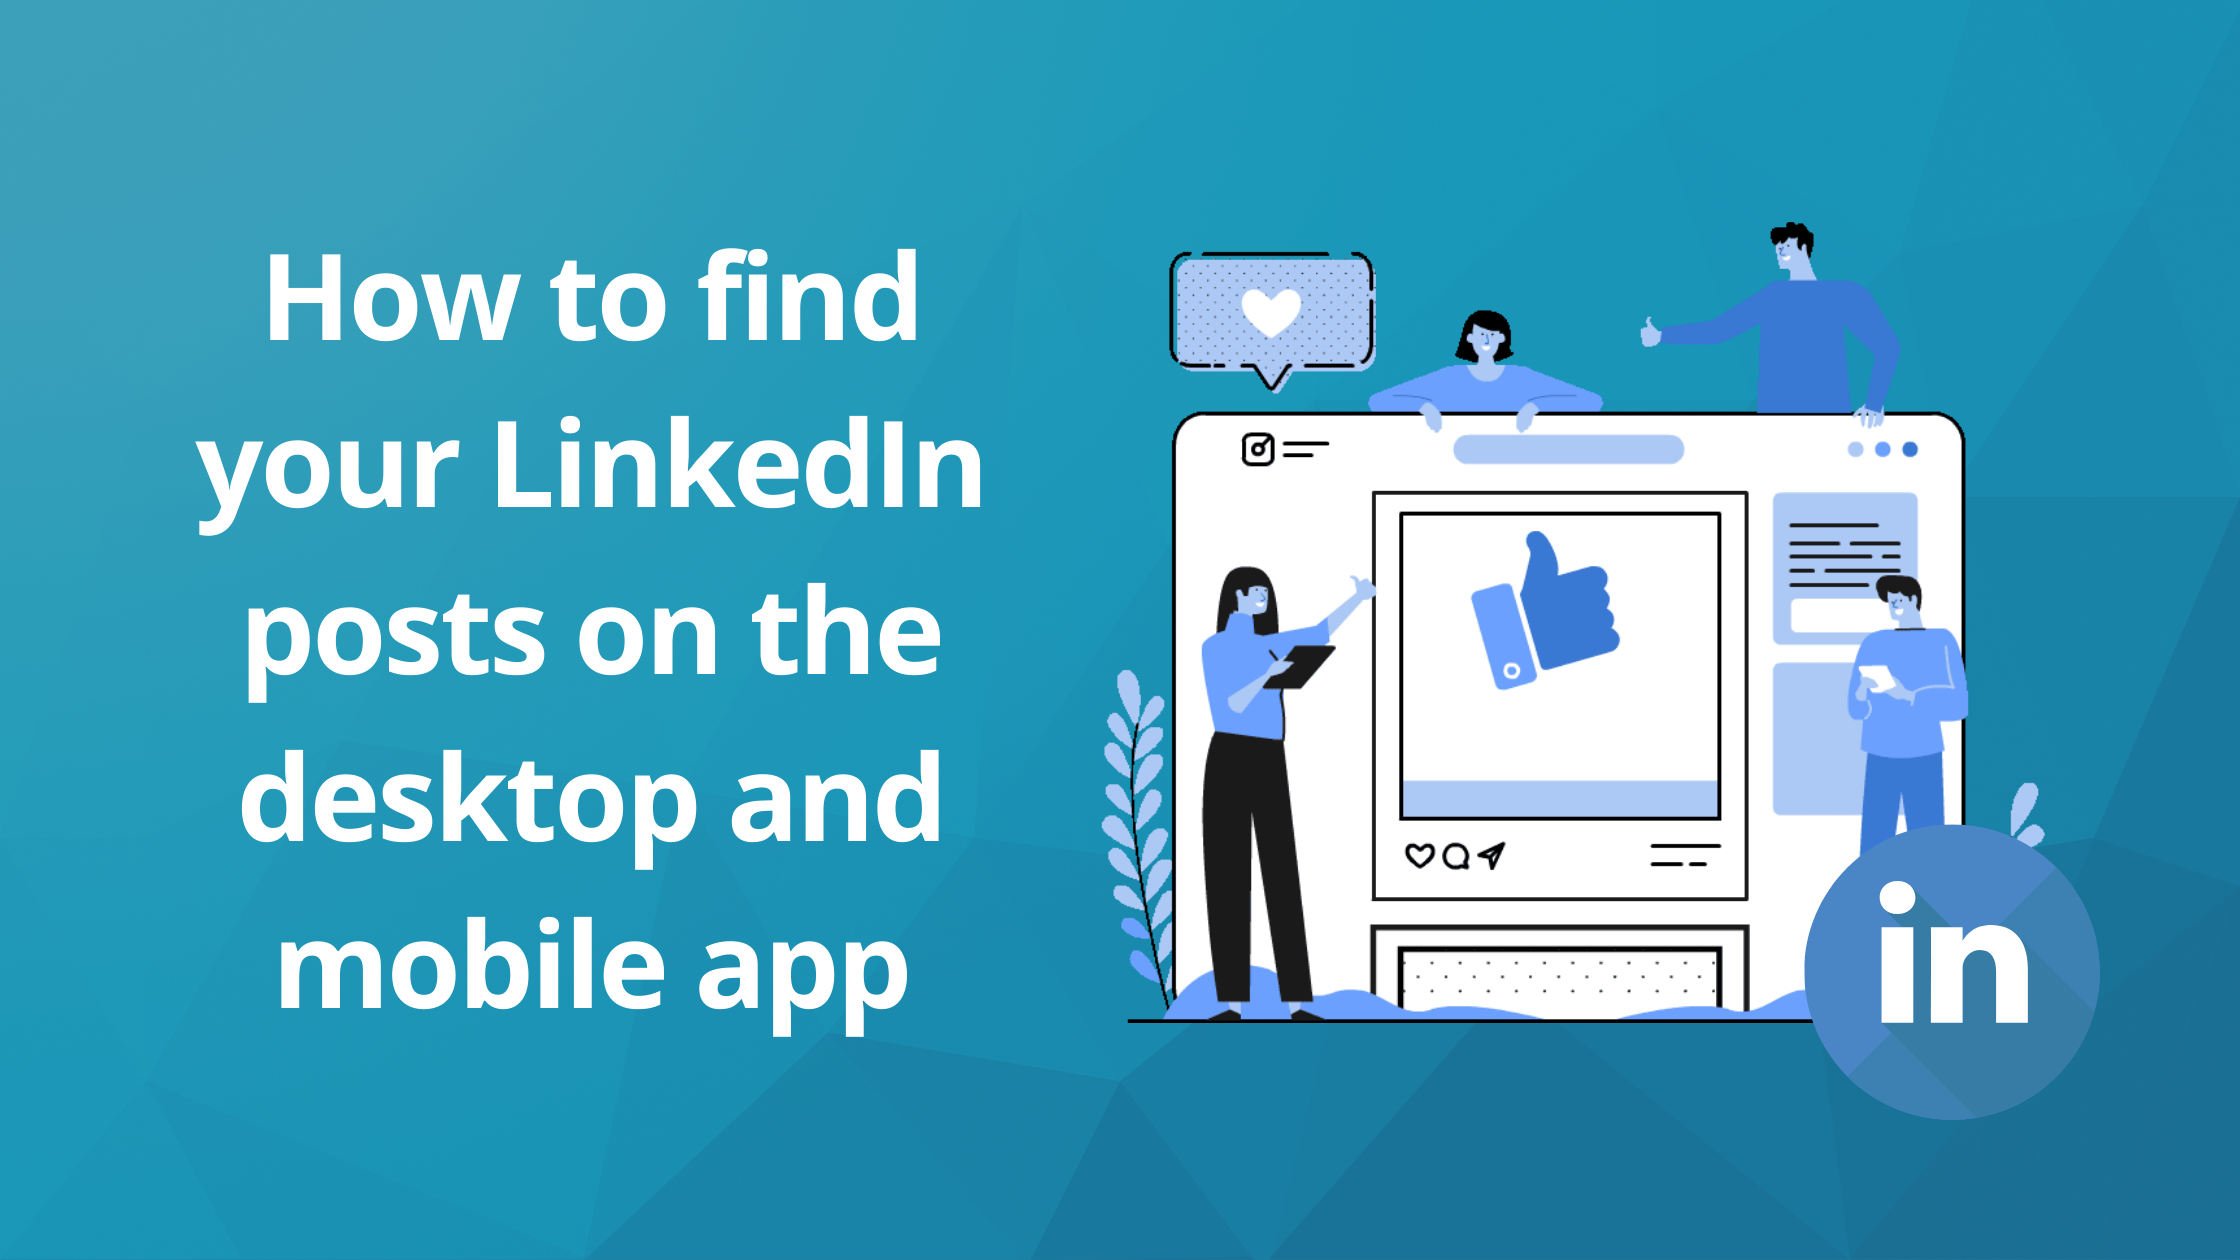 How to find your LinkedIn posts on the desktop and mobile app